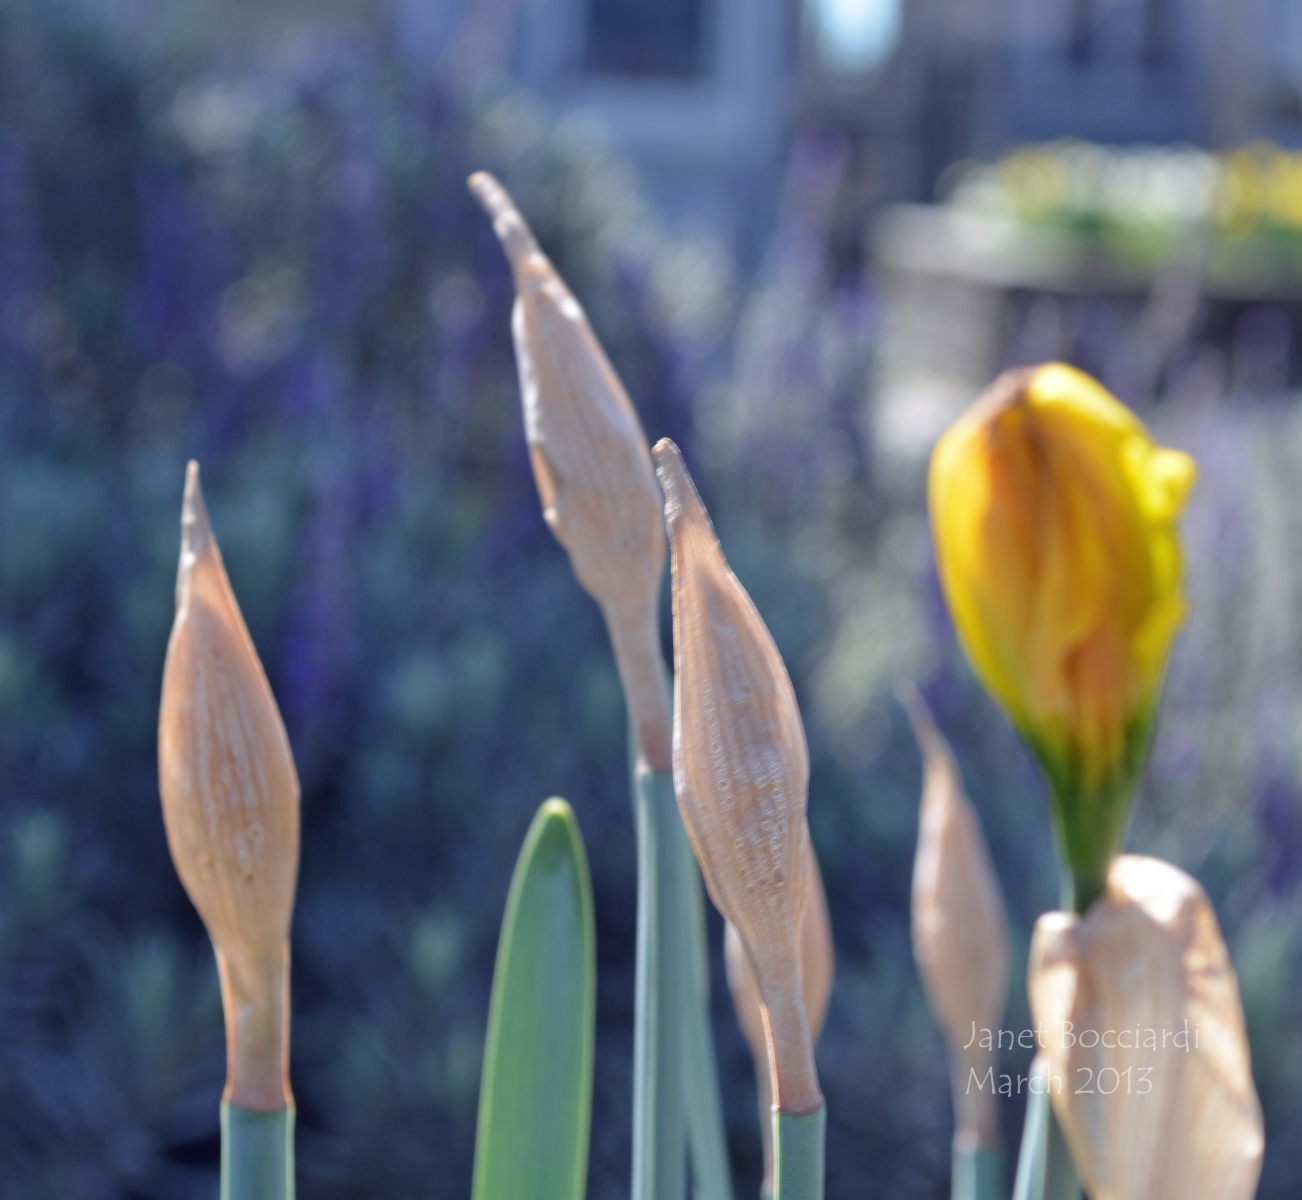 Daffodils almost ready to bloom.